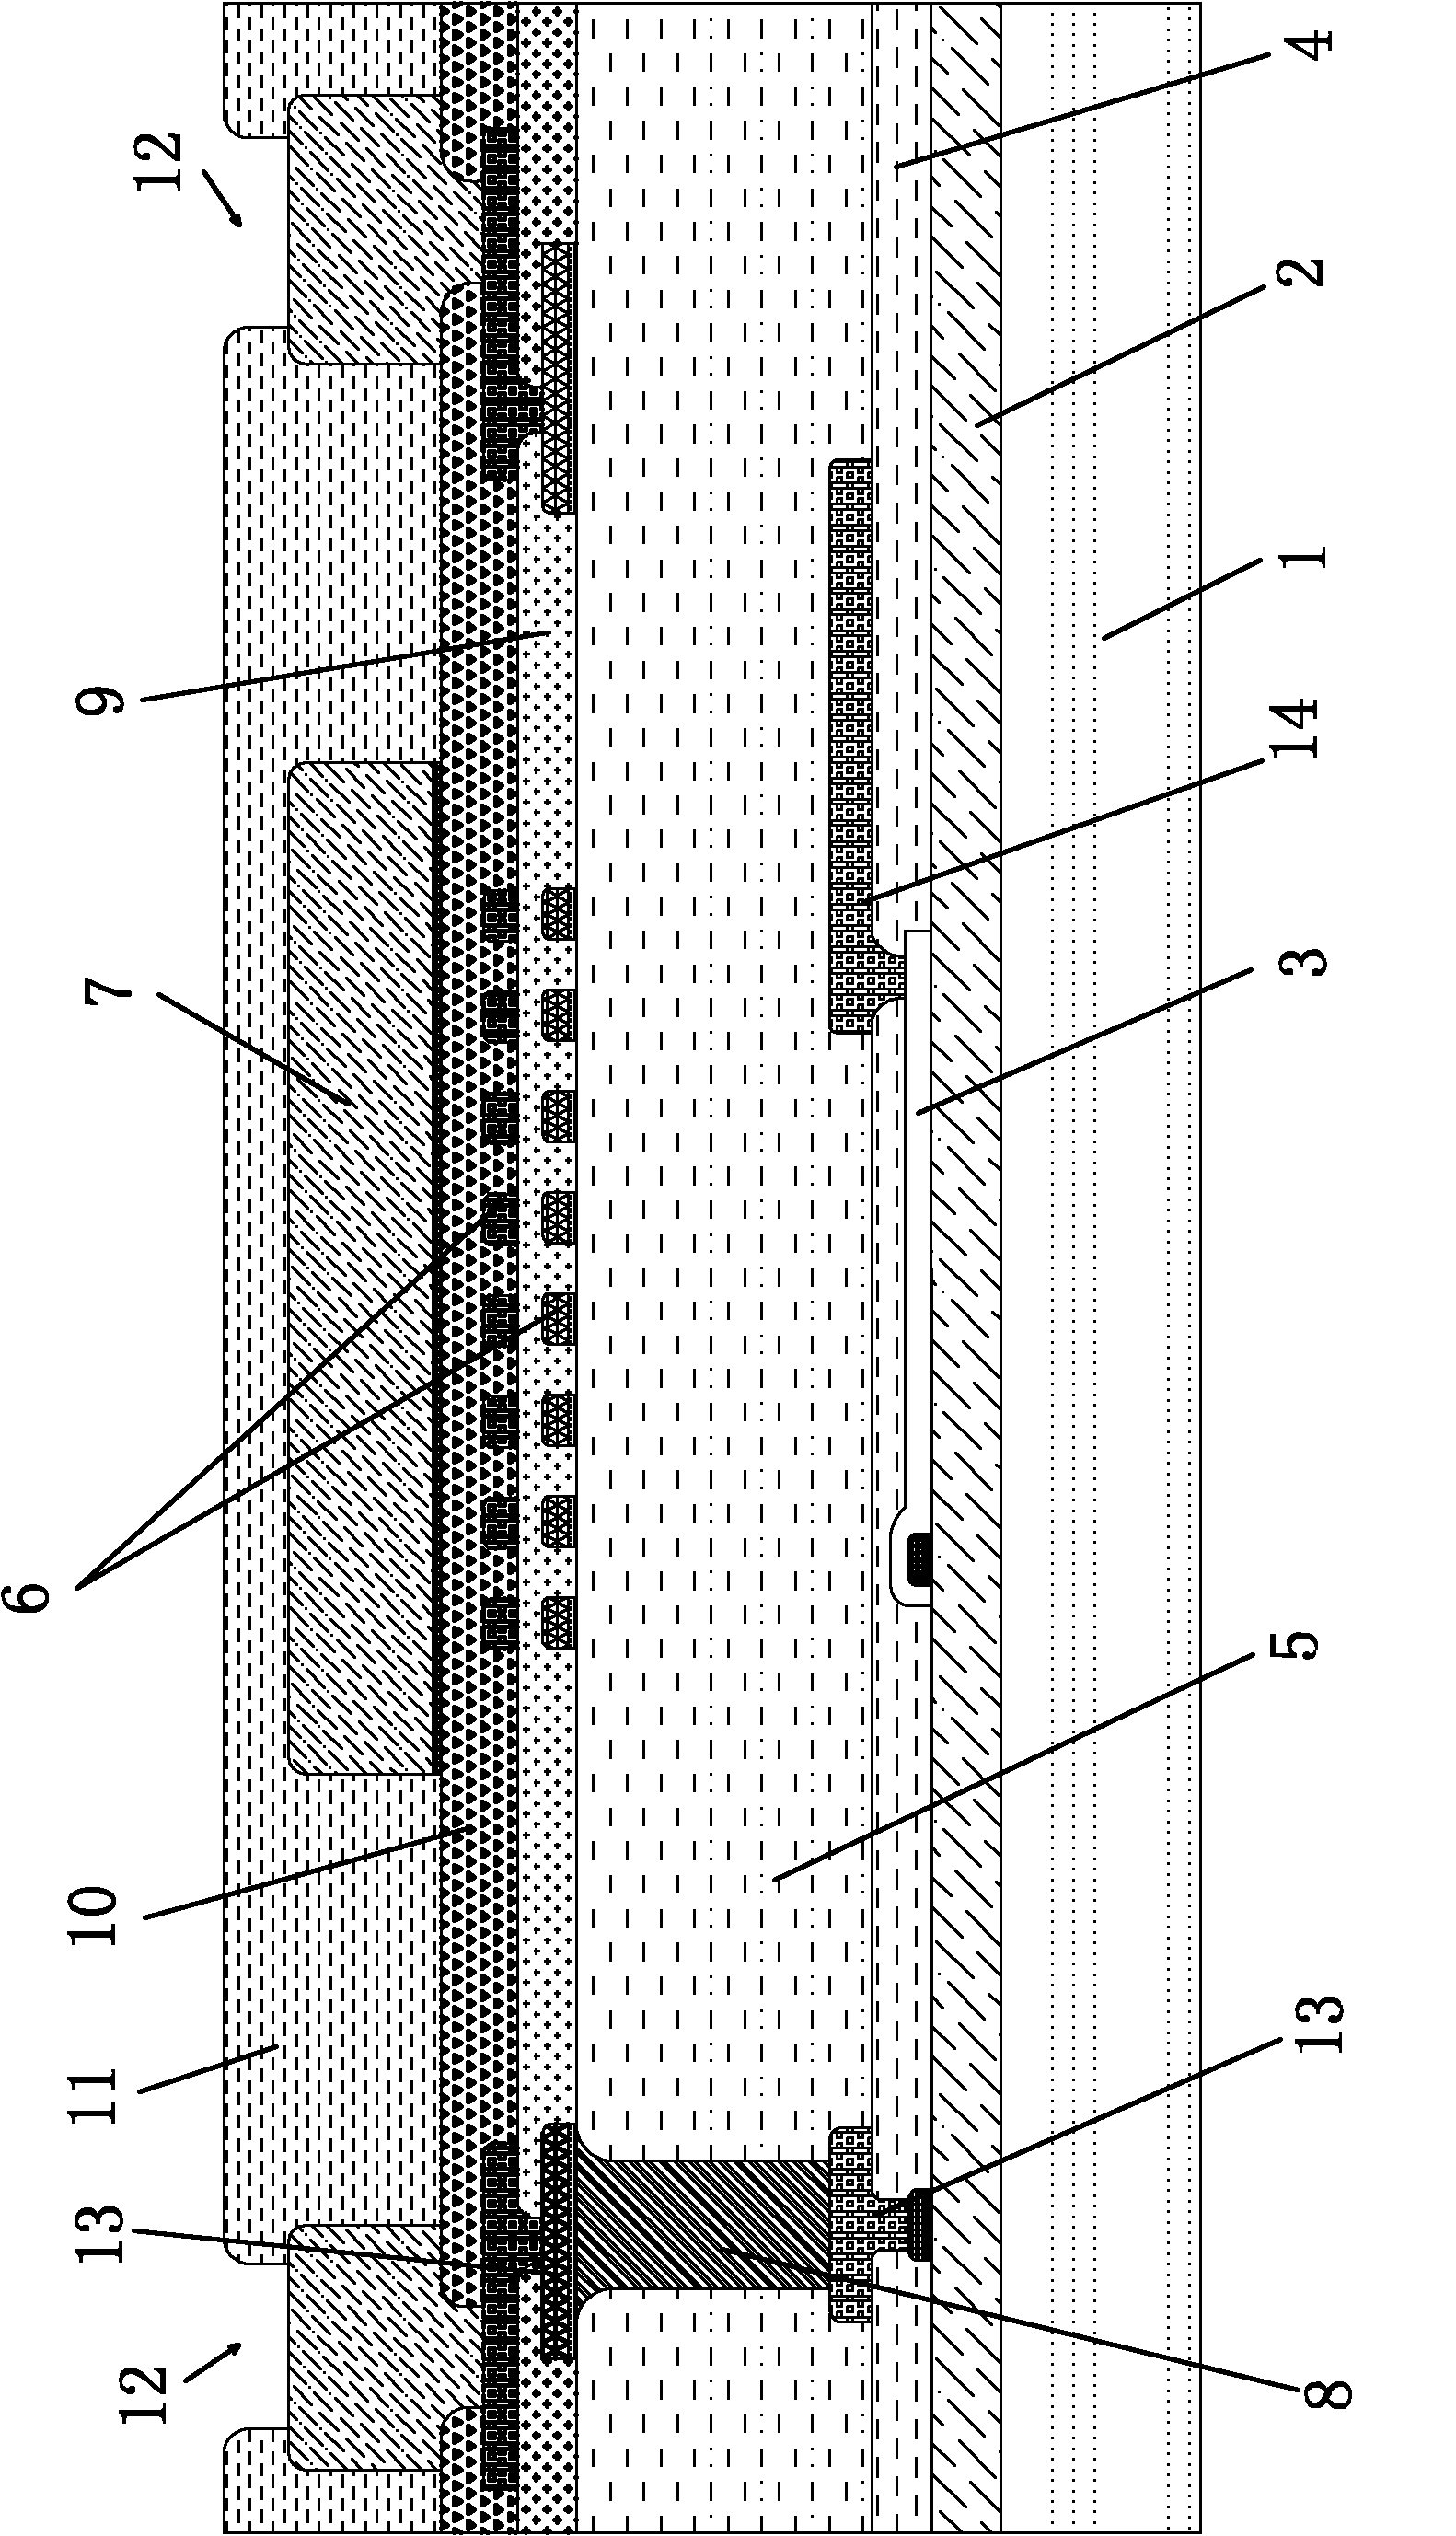 Integrated magnetic electronic signal isolation coupling device and preparation process of integrated magnetic electronic signal isolation coupling device